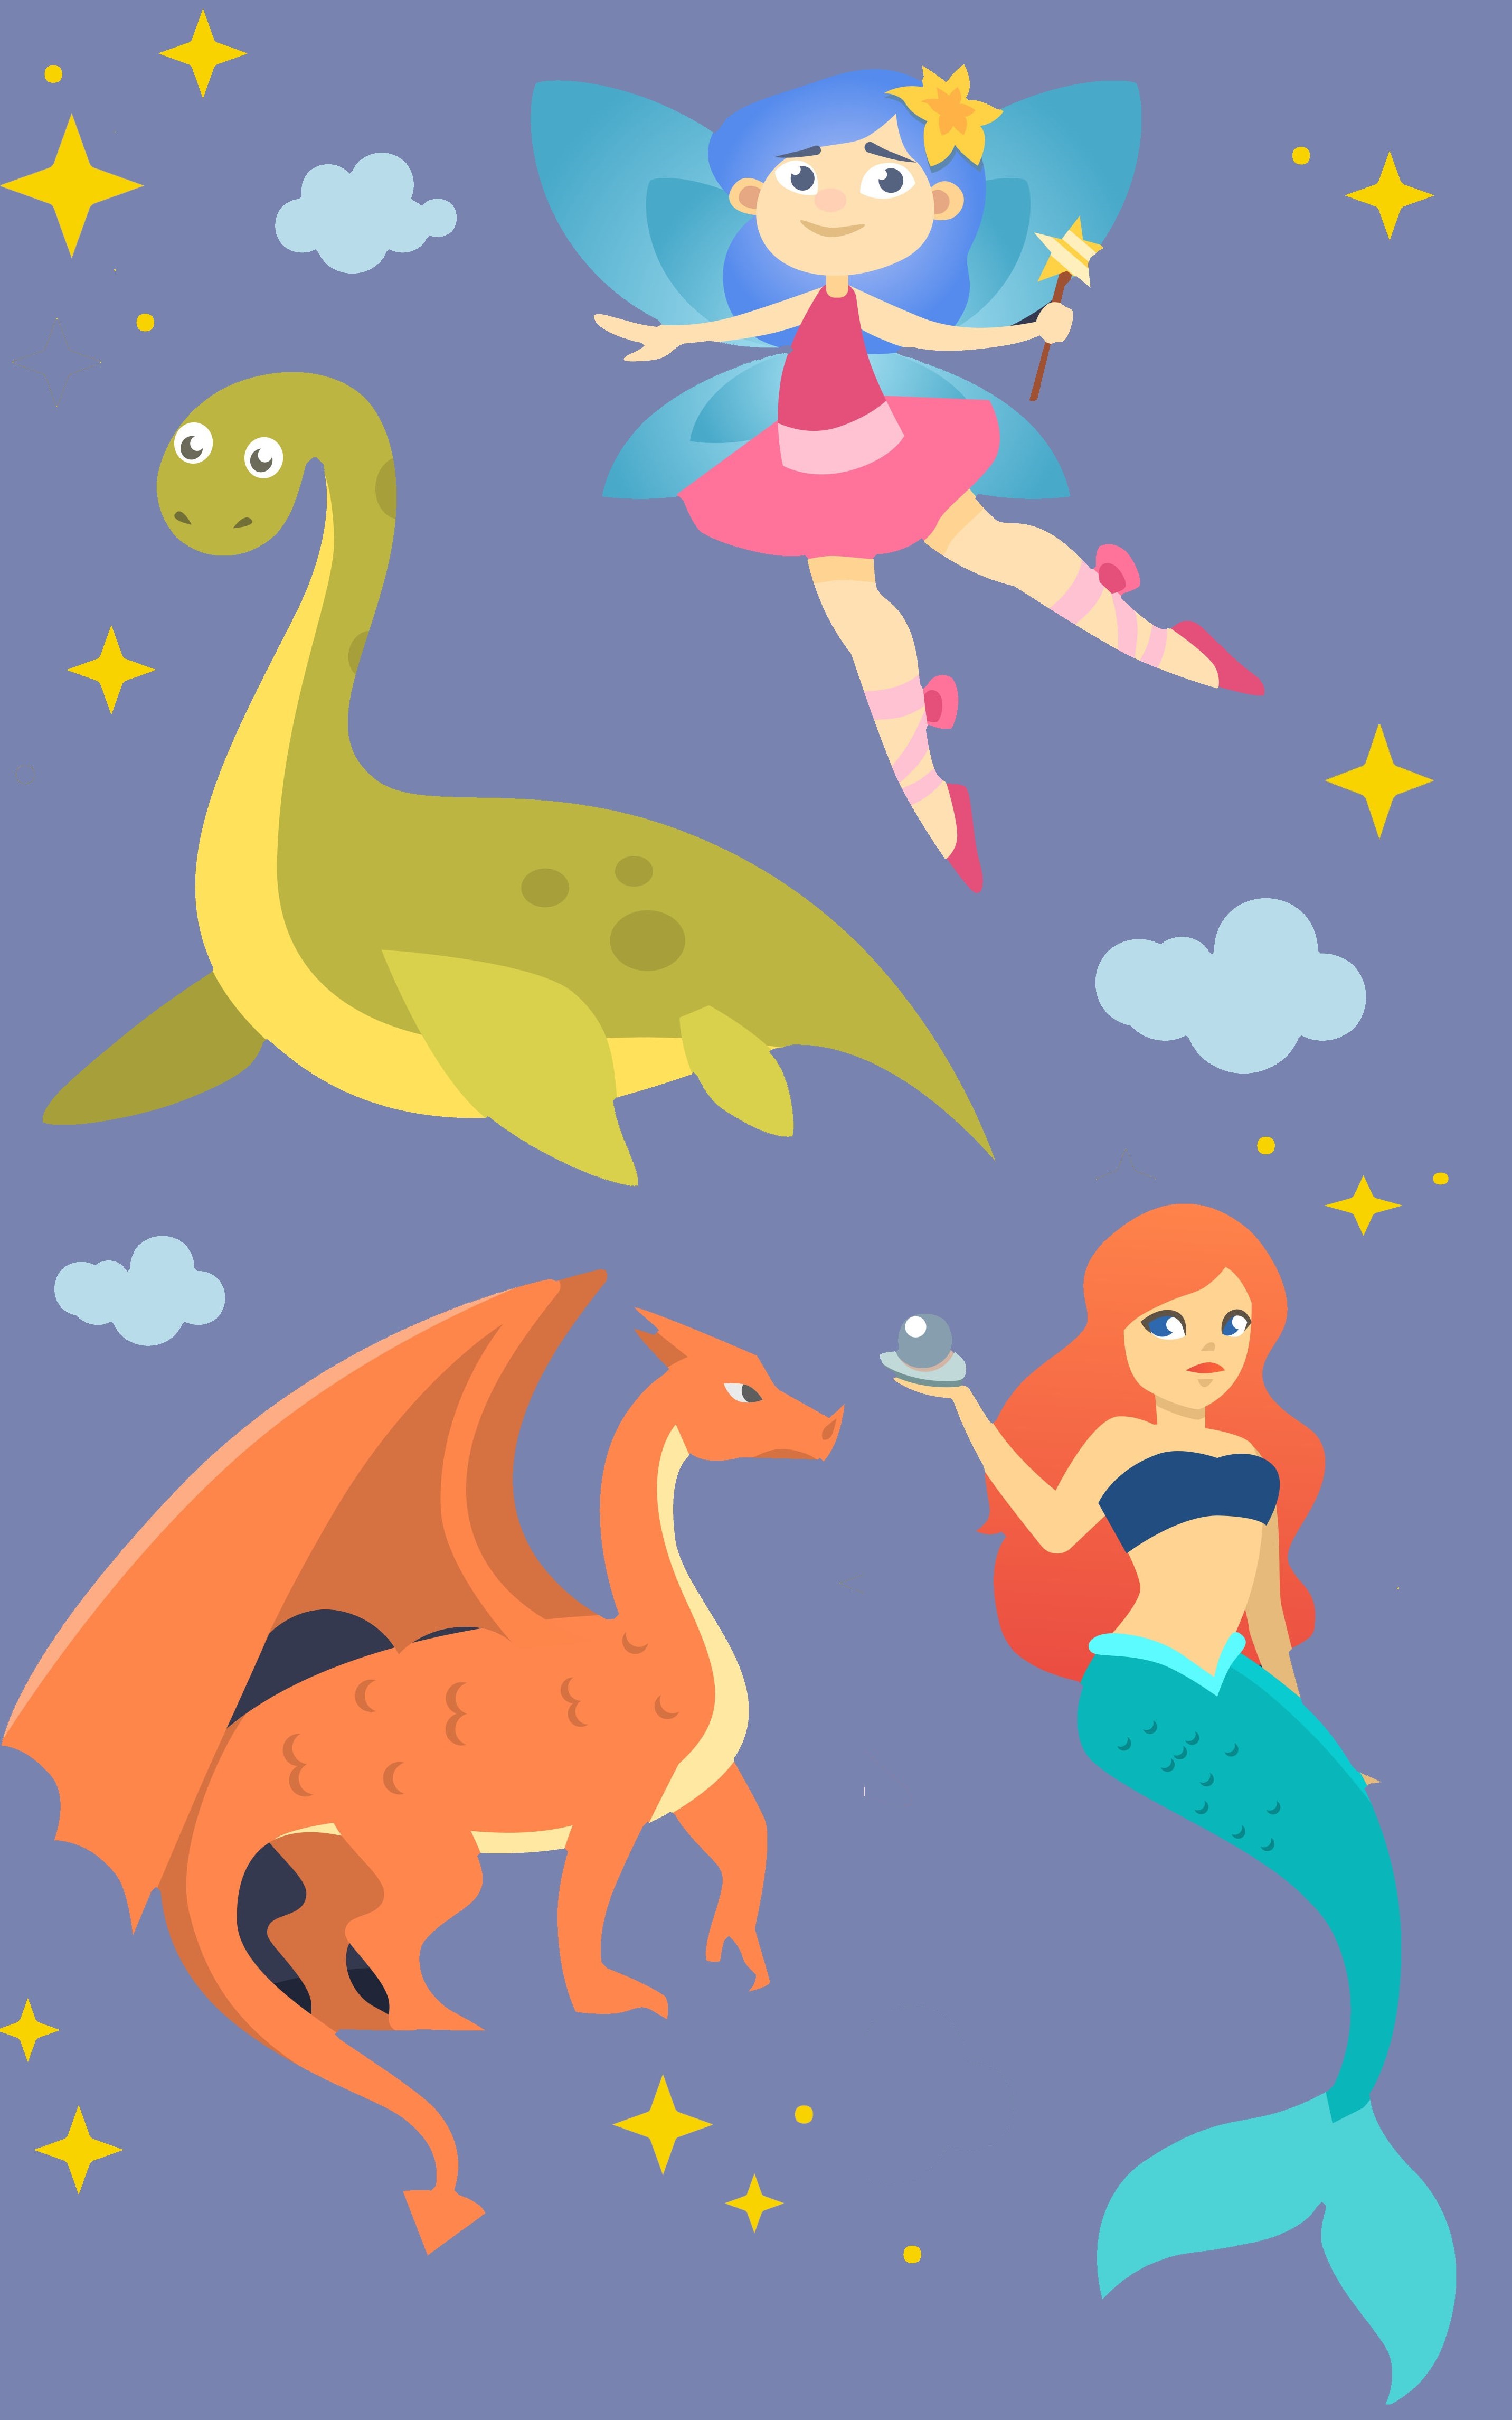 Illustrations of dragon, Loch ness monster, mermaid, and fairy.